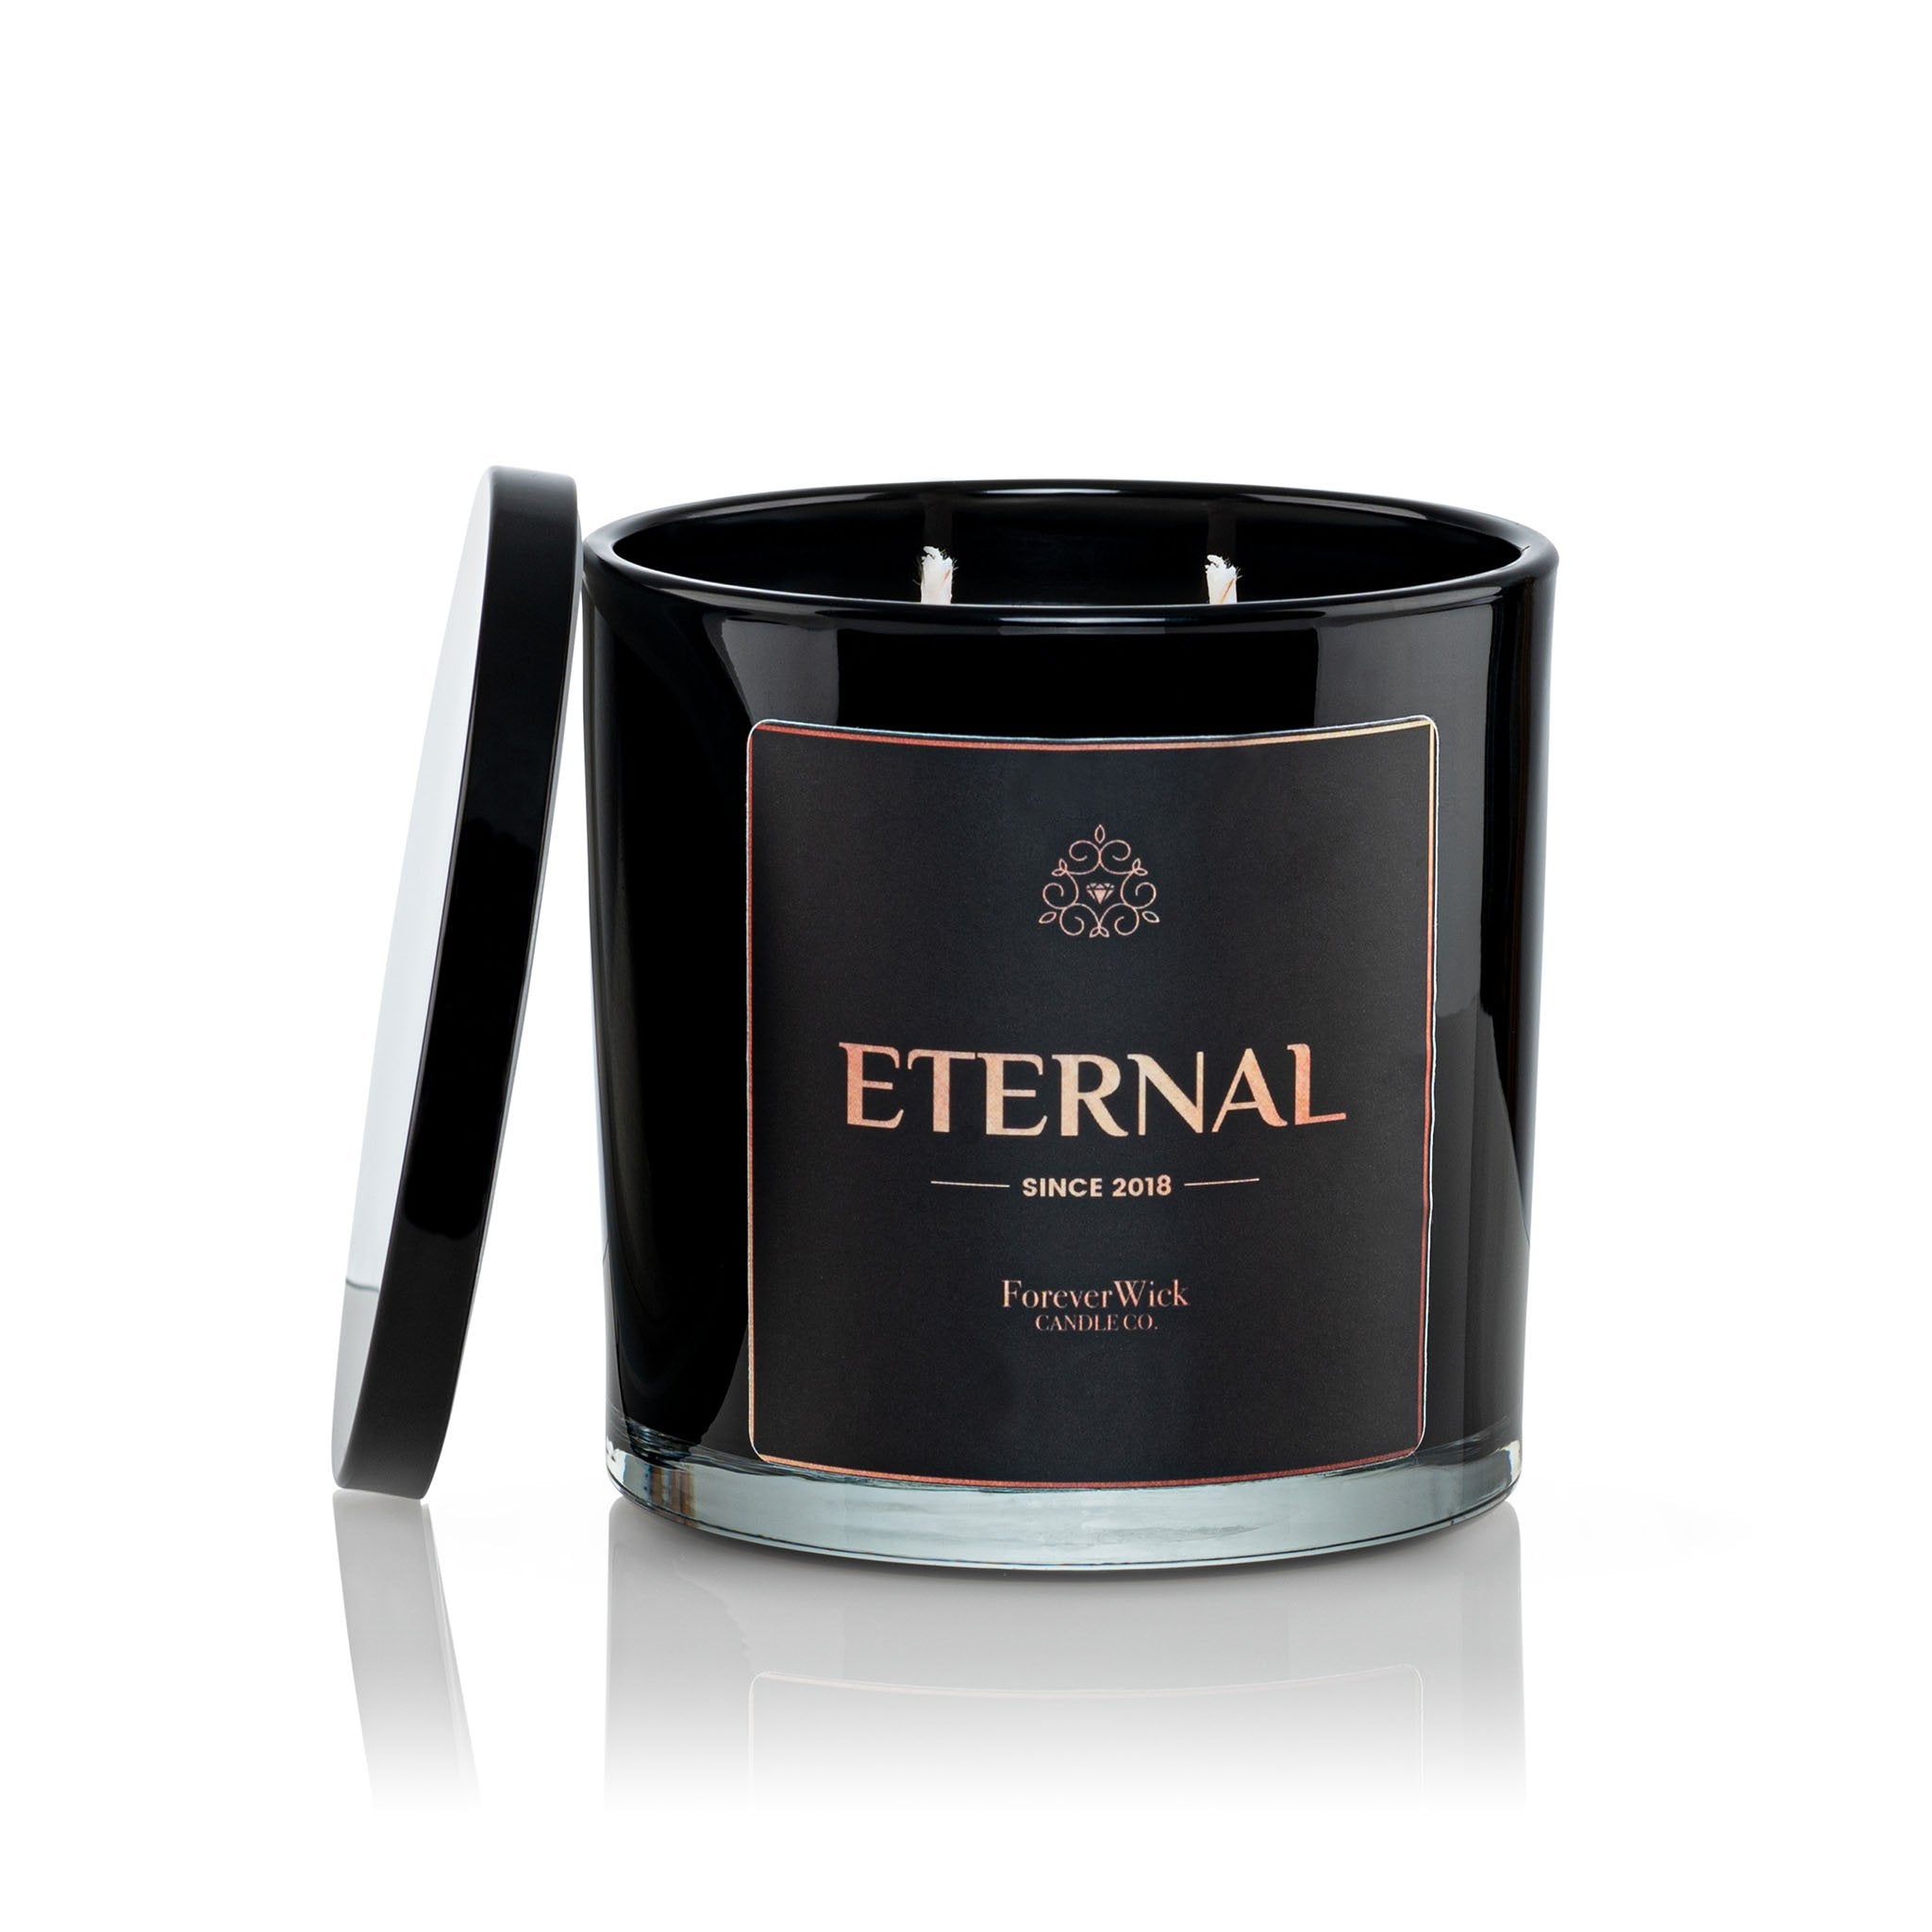 Eternal Diamond Candle - ForeverWick.com – ForeverWick Candle